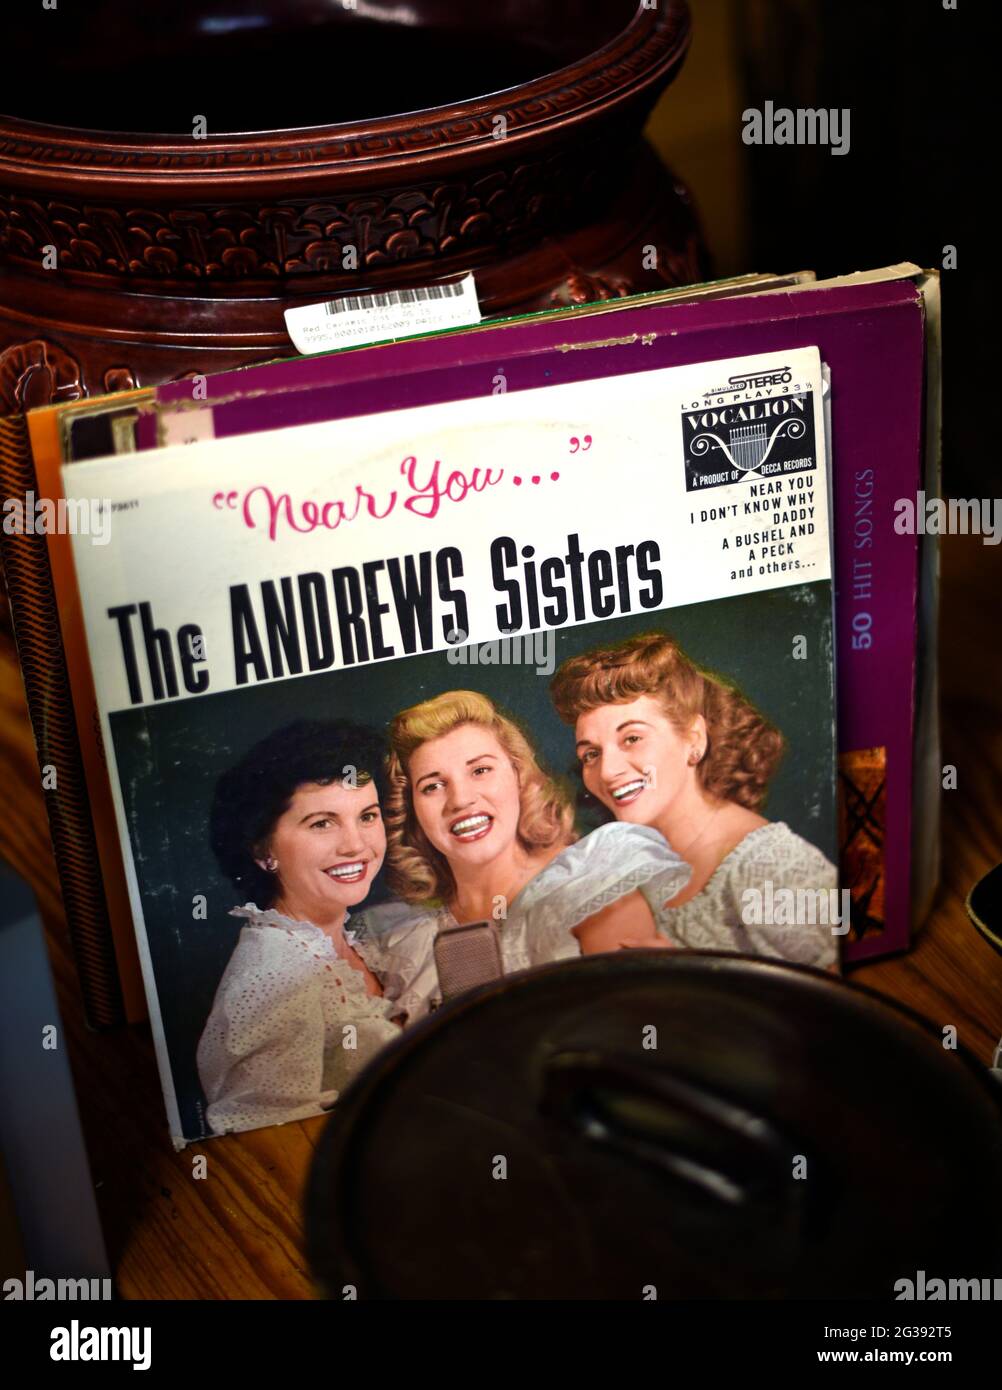 A vintage vinyl album by The Andrews Sisters, titled 'Near You', released in 1958 by Vocalion Records, for sale in an antique shop in New Mexico. Stock Photo